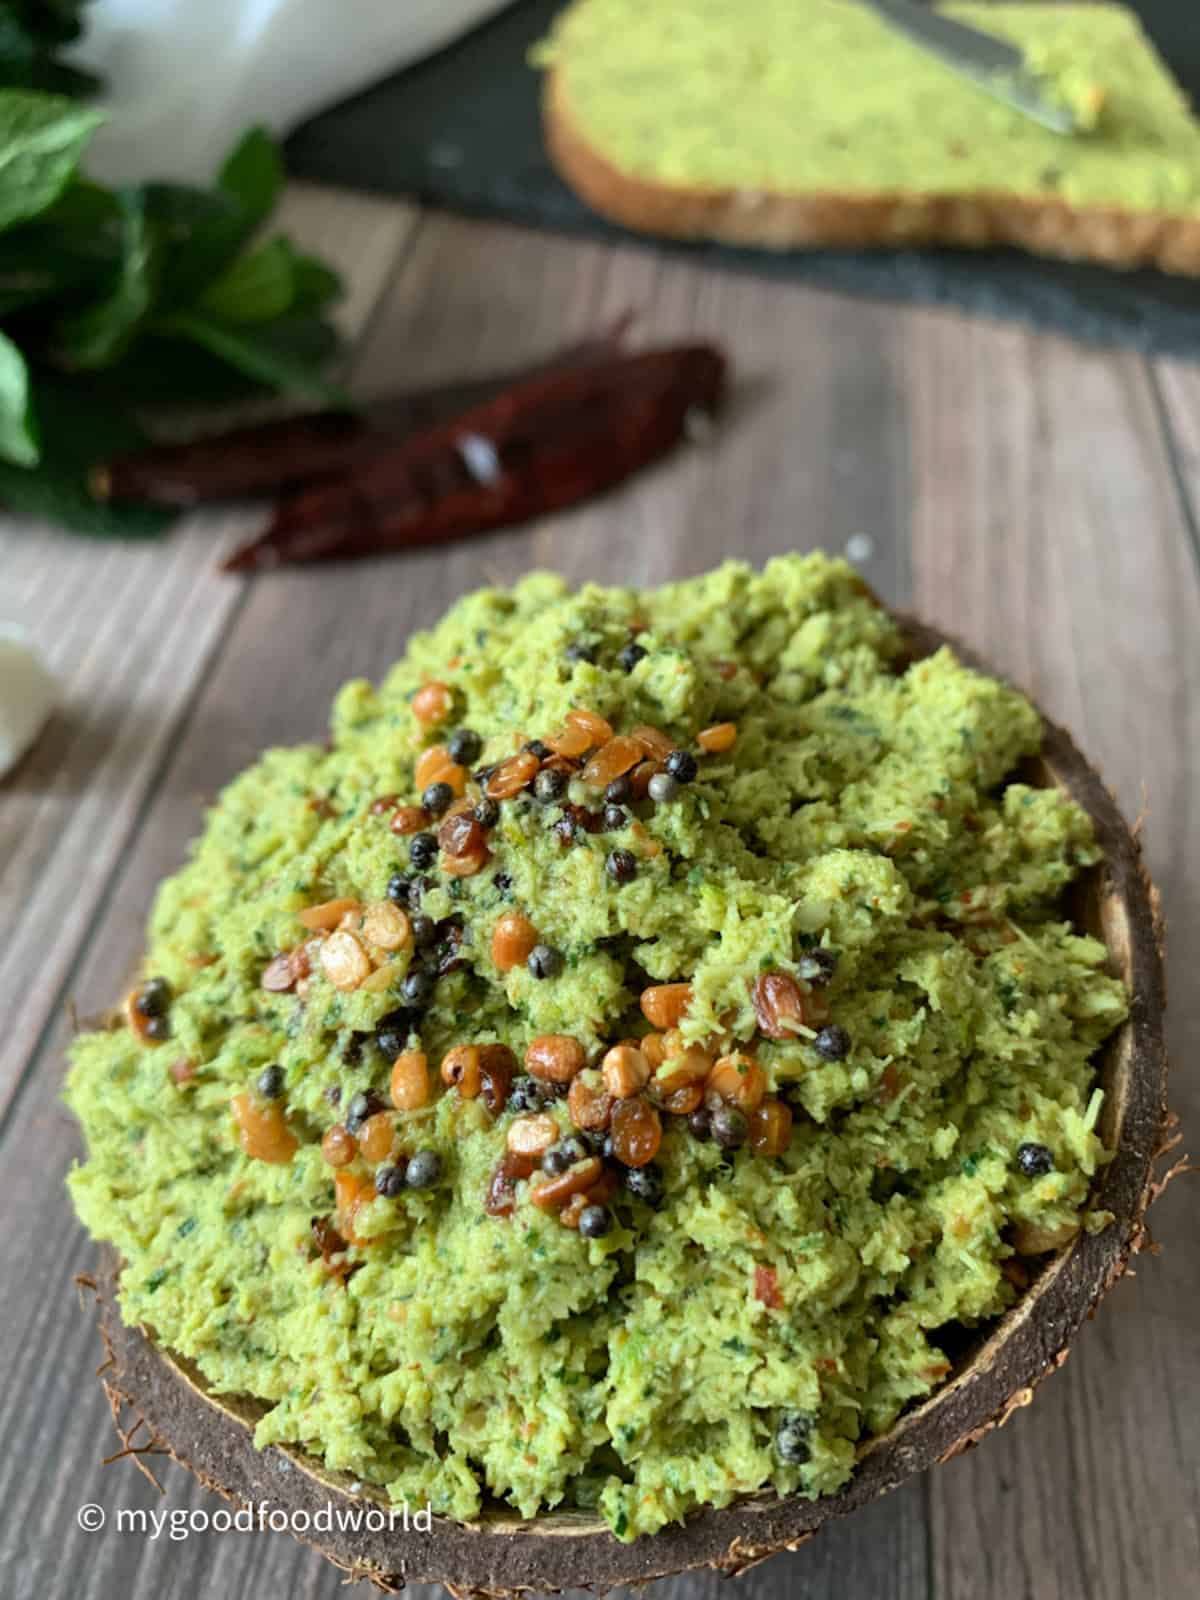 Green colored chutney made with coconut and mint leaves placed in a coconut shell.